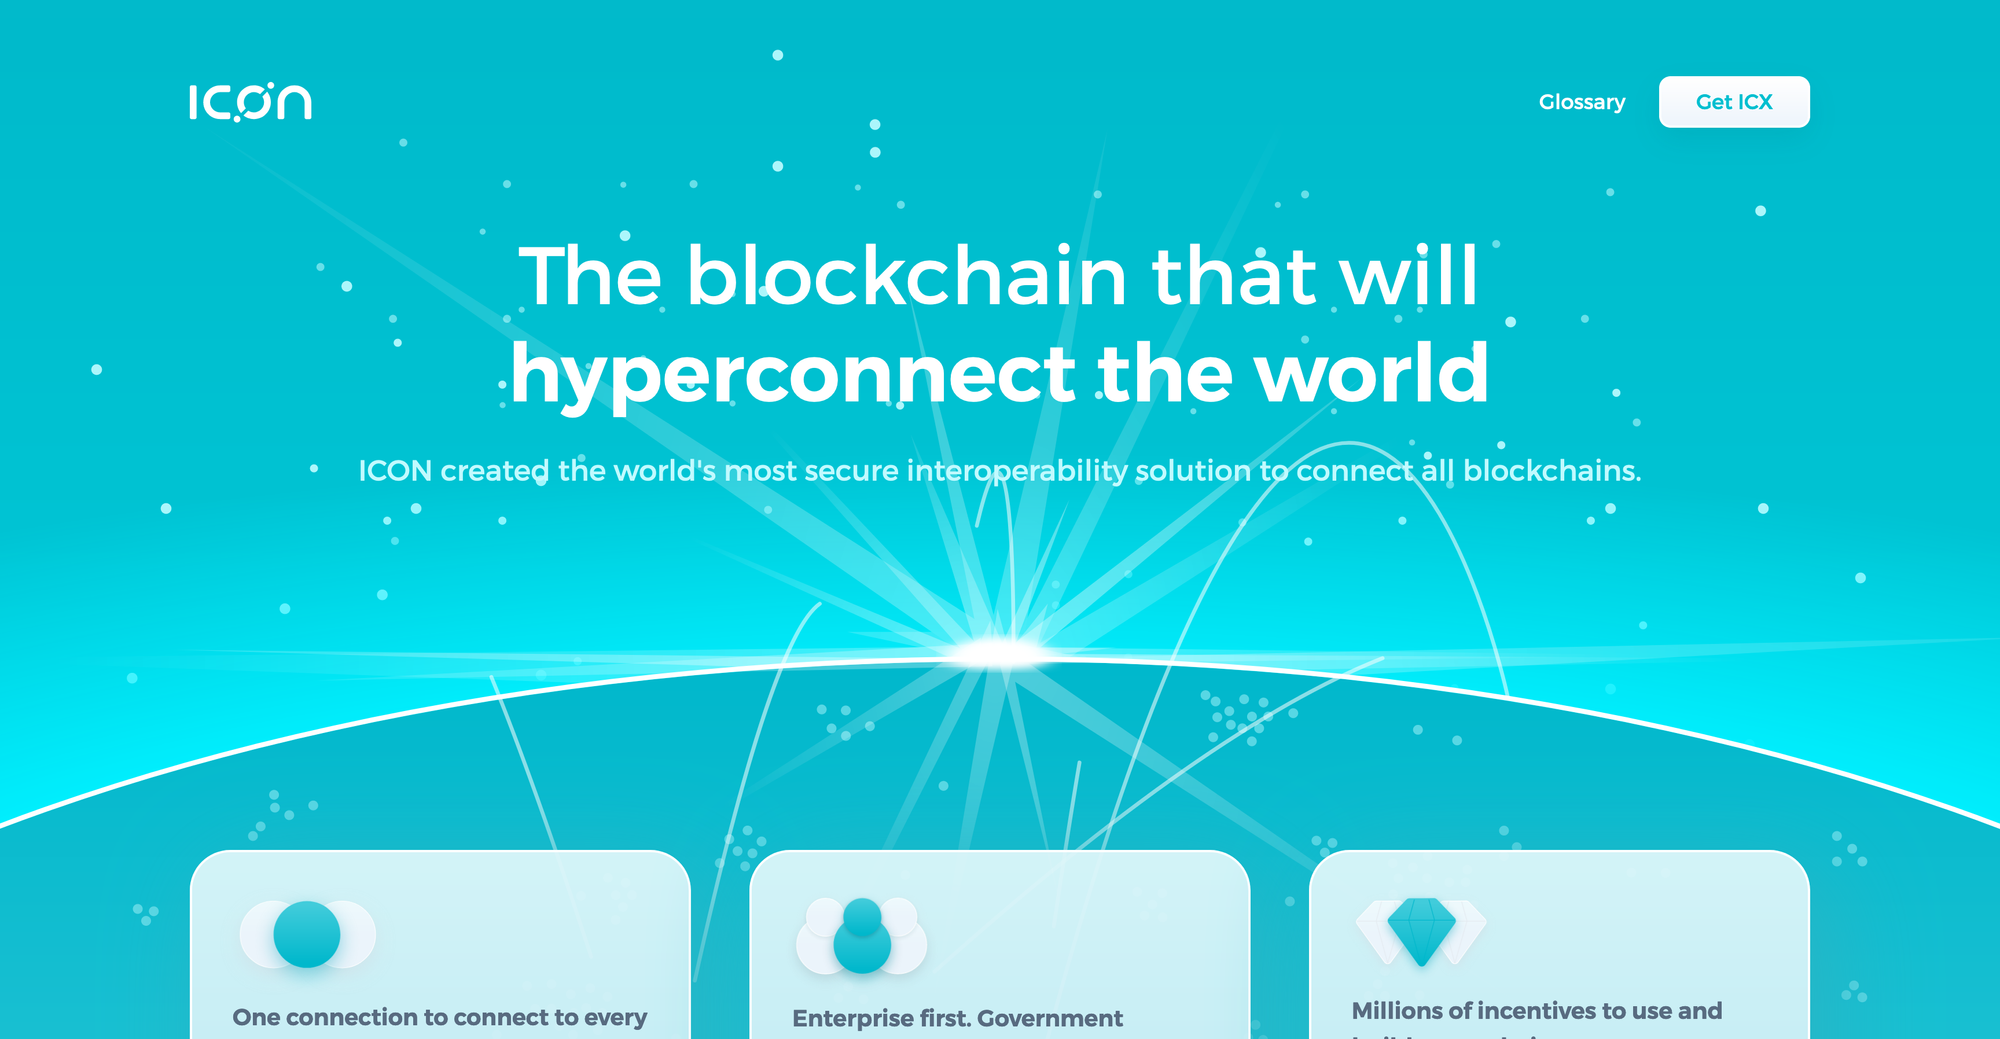 The hero for whyicx.com.  The blockchain that will hyperconnect the world ICON created the world's most secure interoperability solution to connect all blockchains.